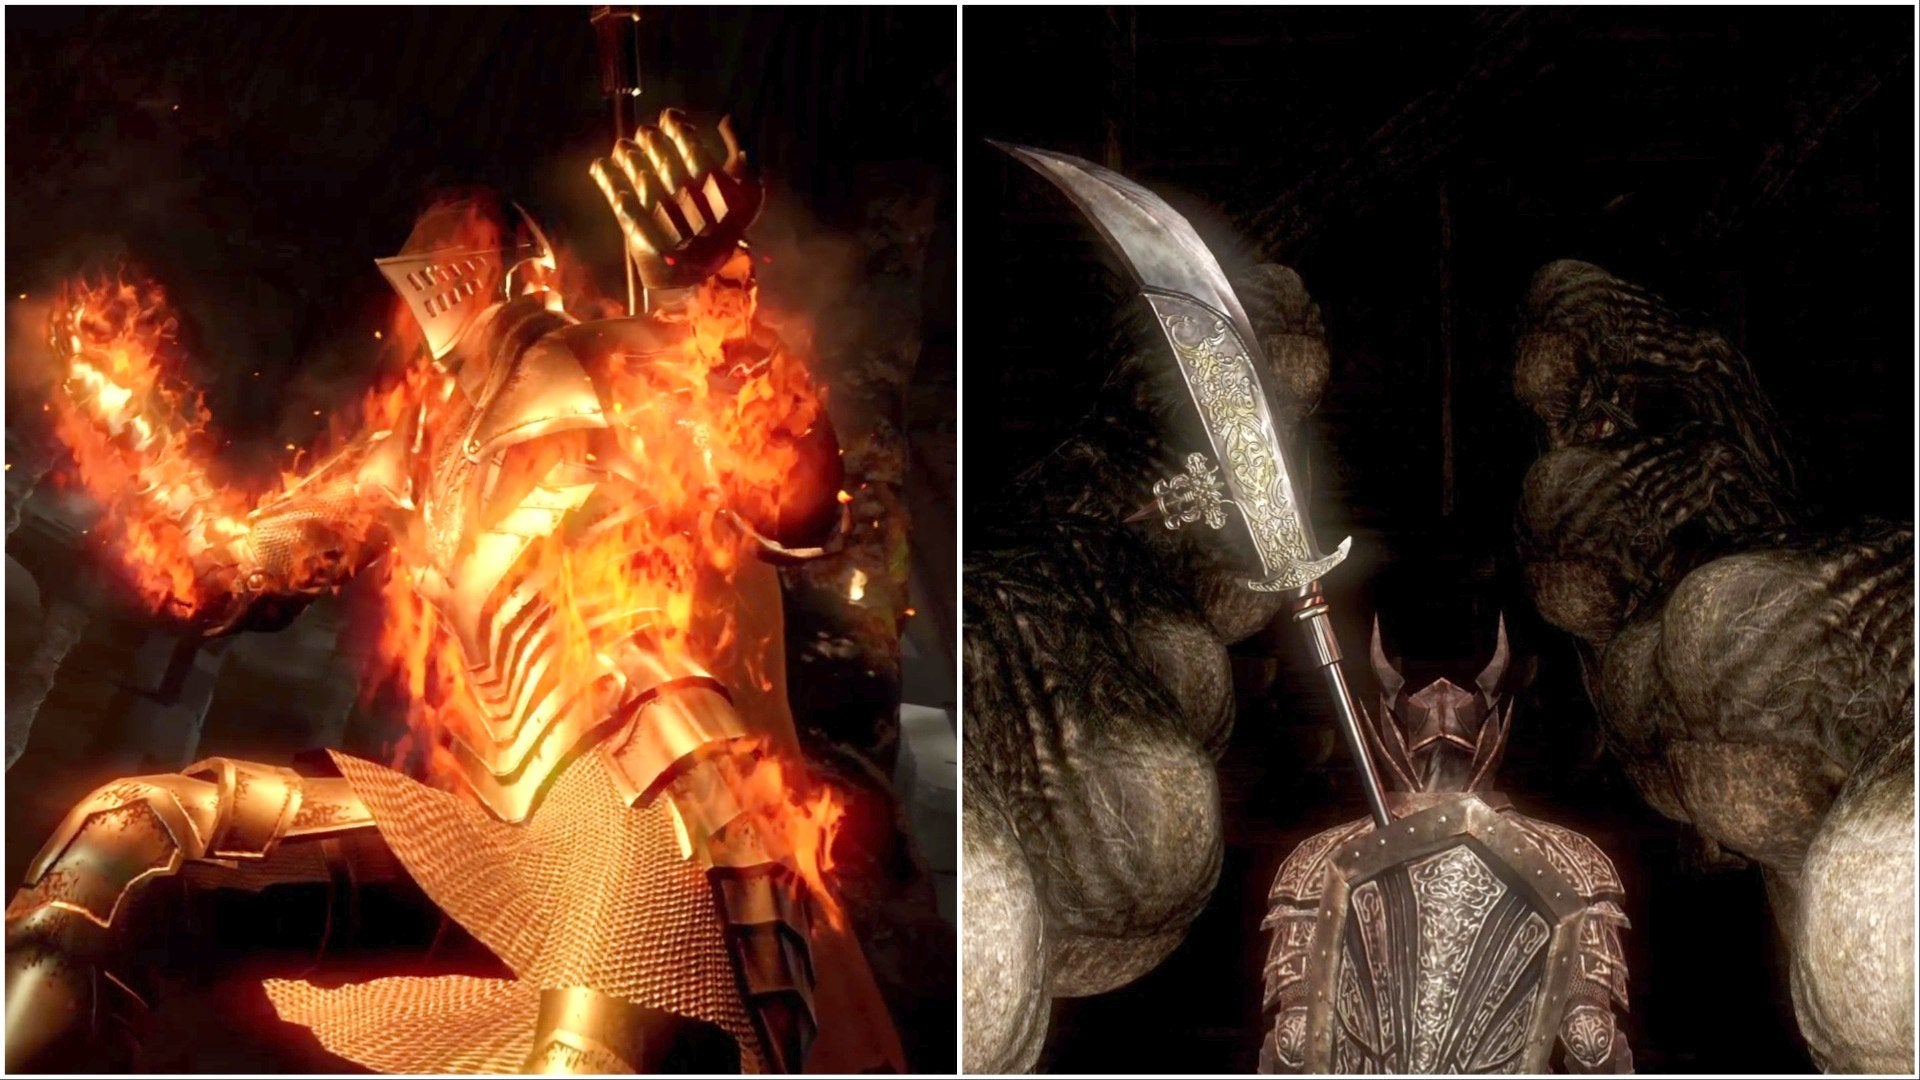 The Link the Fire and Dark Lord endings from Dark Souls.